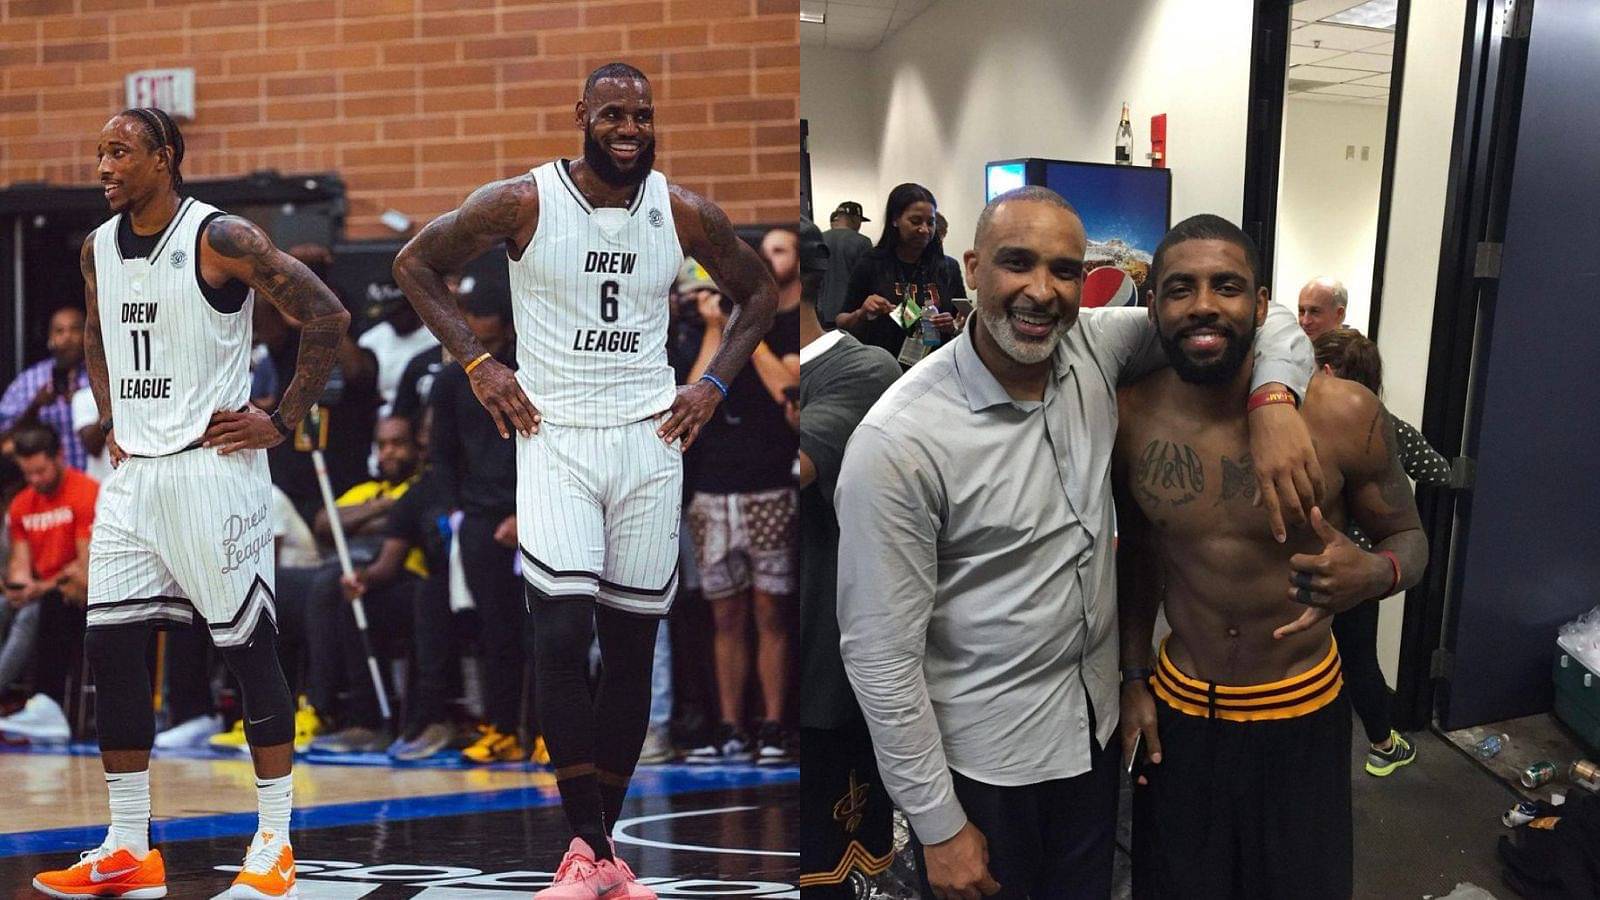 “Kyrie Irving was helping Lakers coach Phil Handy with his camp”: Uncle Drew’s absence from the Drew League had everyone asking where the Nets star was